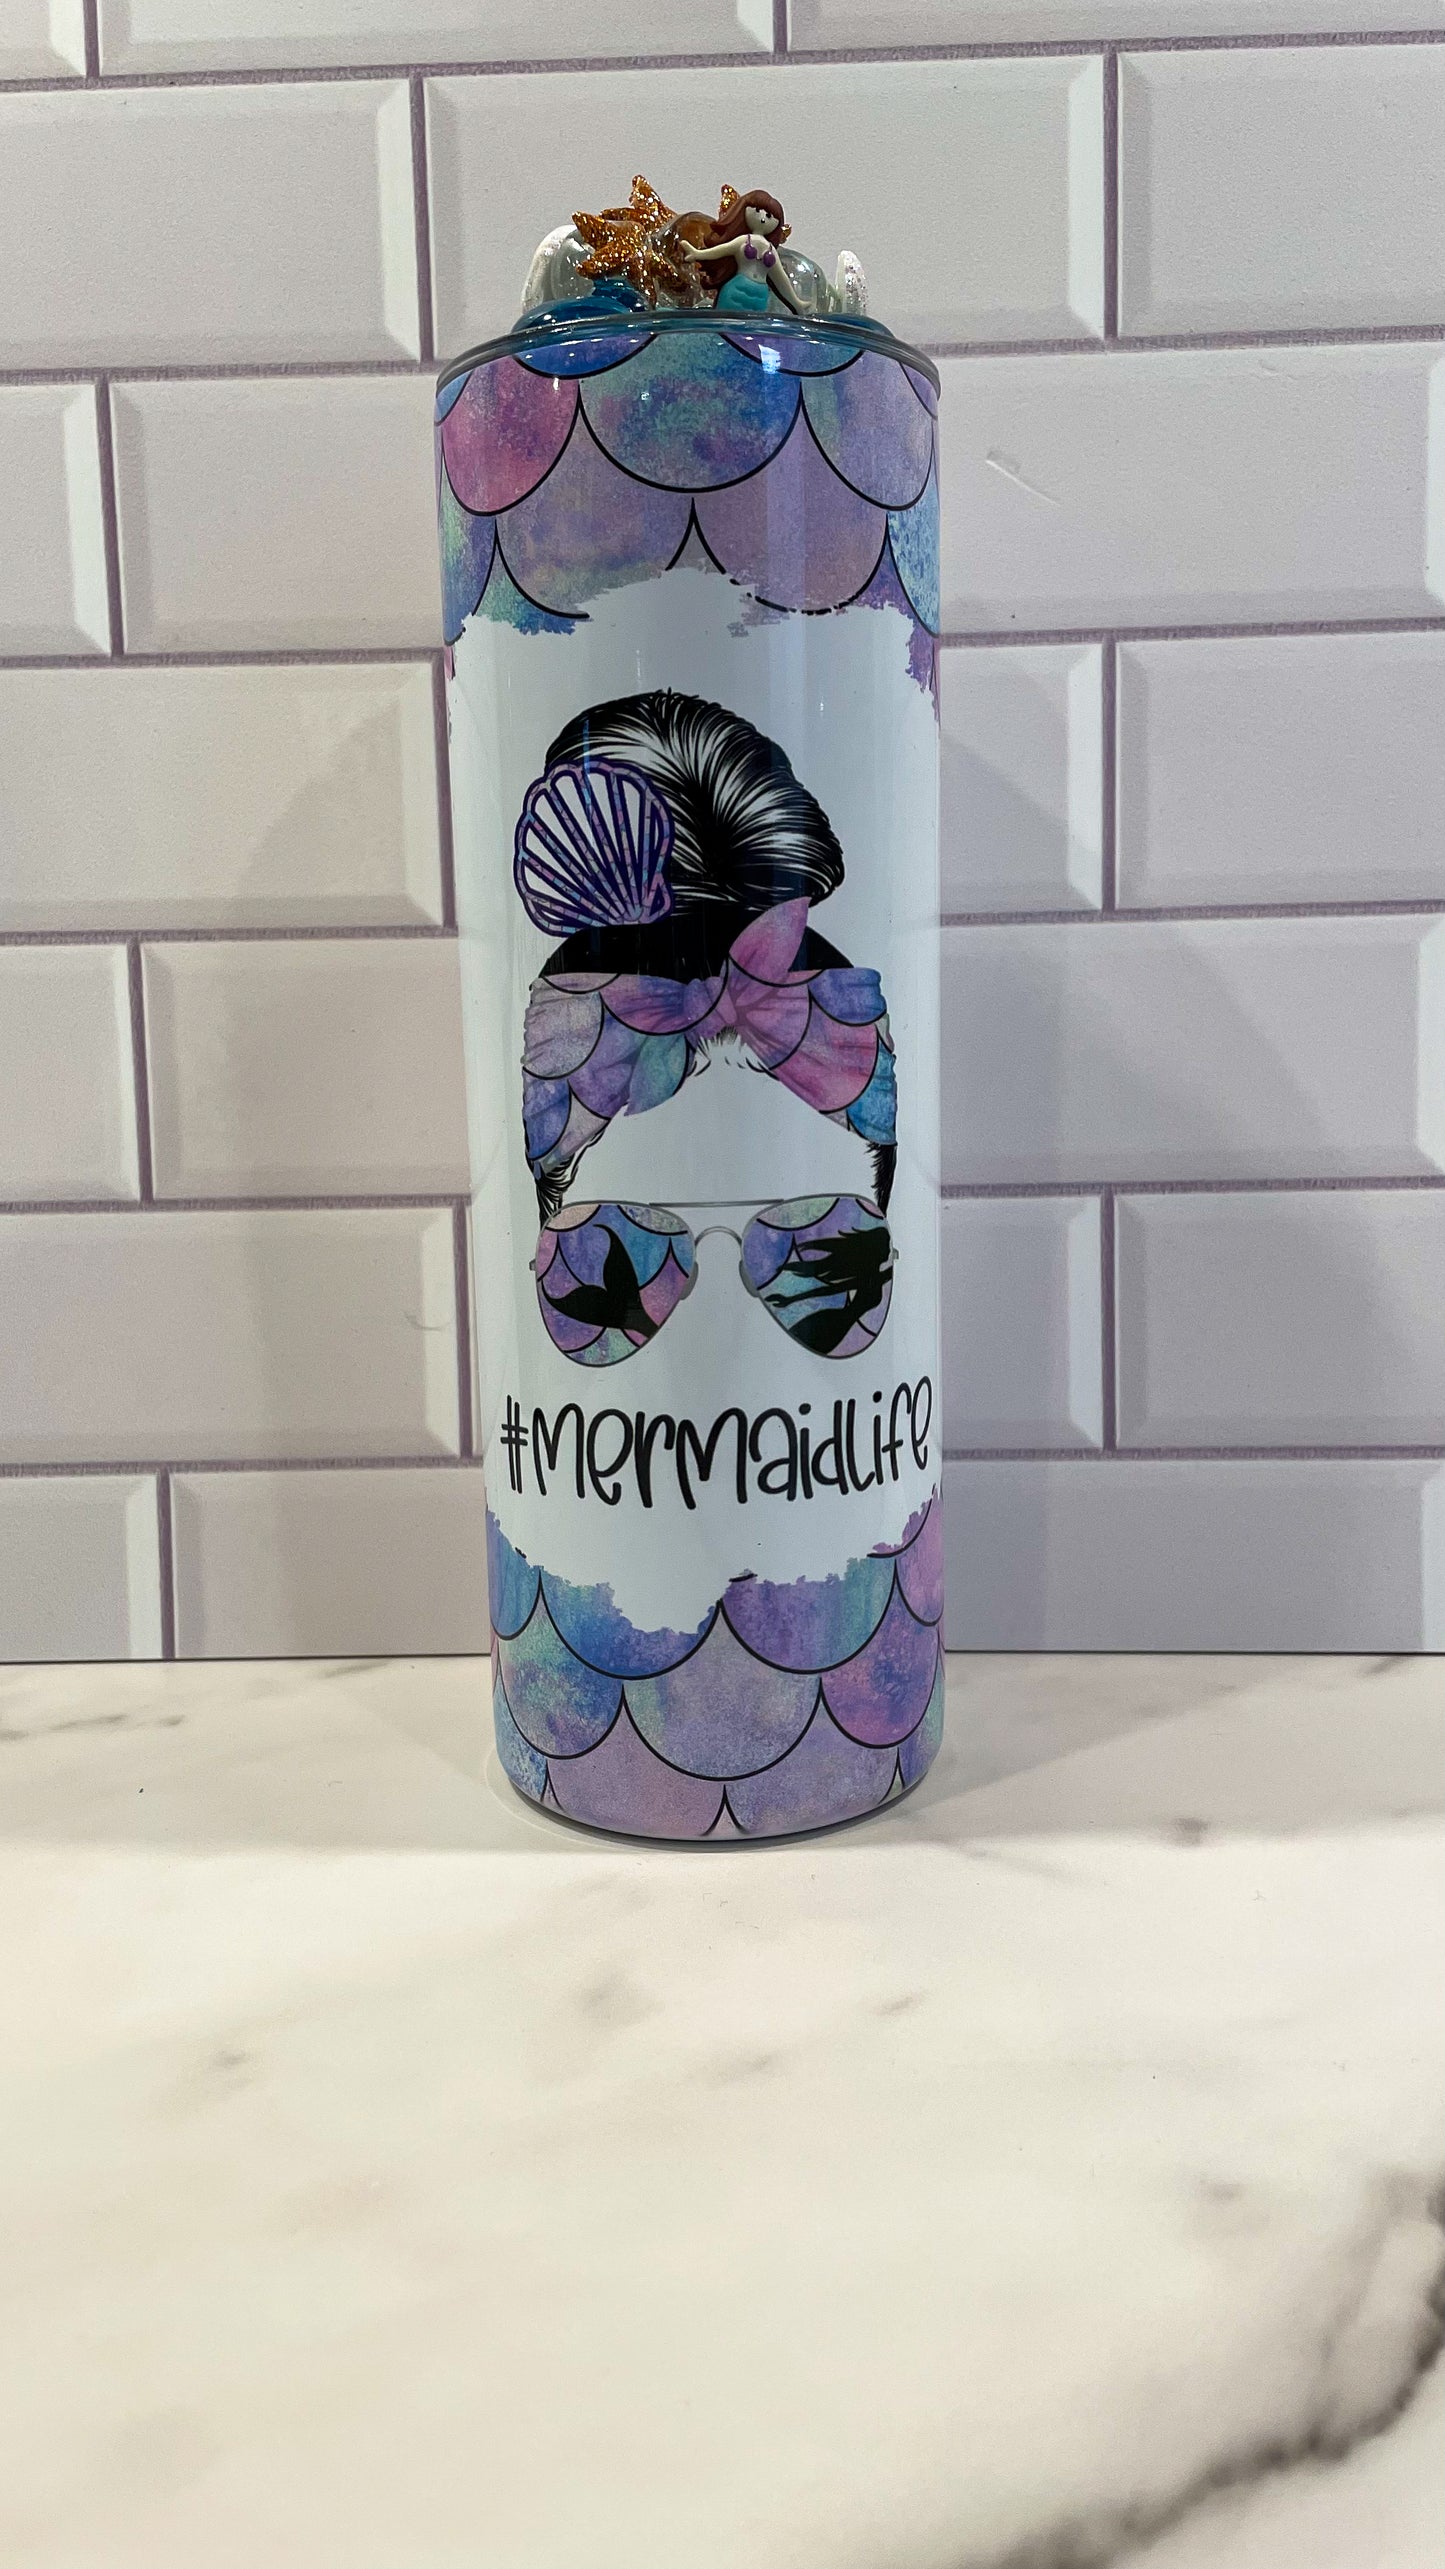 Mermaid Life with 3d Removable topper lid.